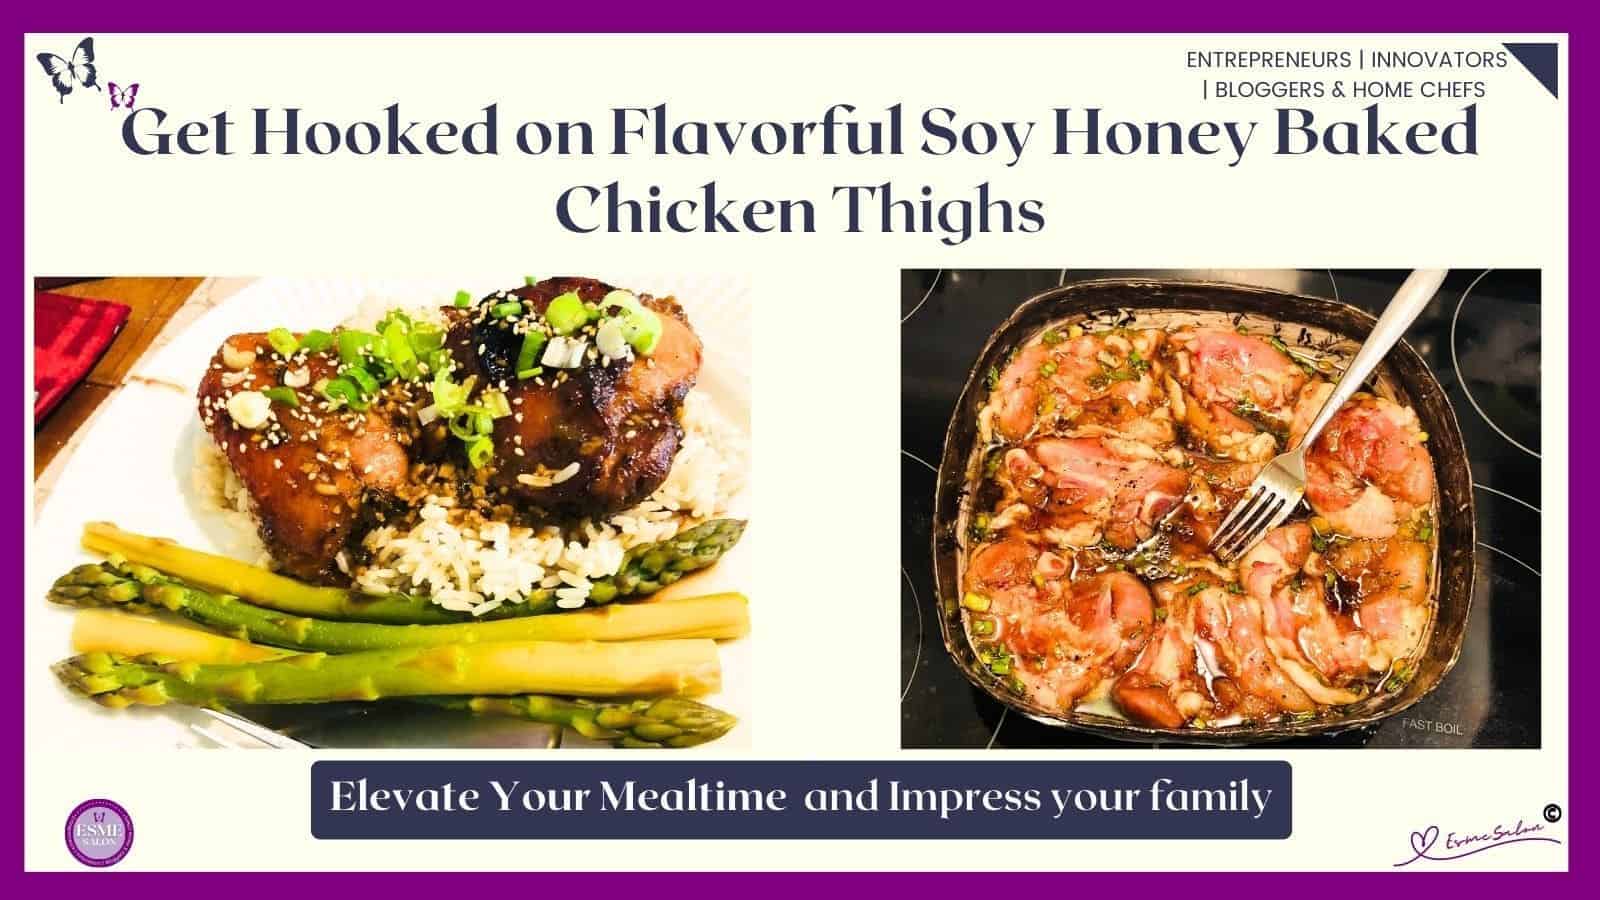 an image of chicken pieces in soy sauce marinade, as well as a plate with Soy Honey Baked Chicken thighs served on rice with asparagus on the side